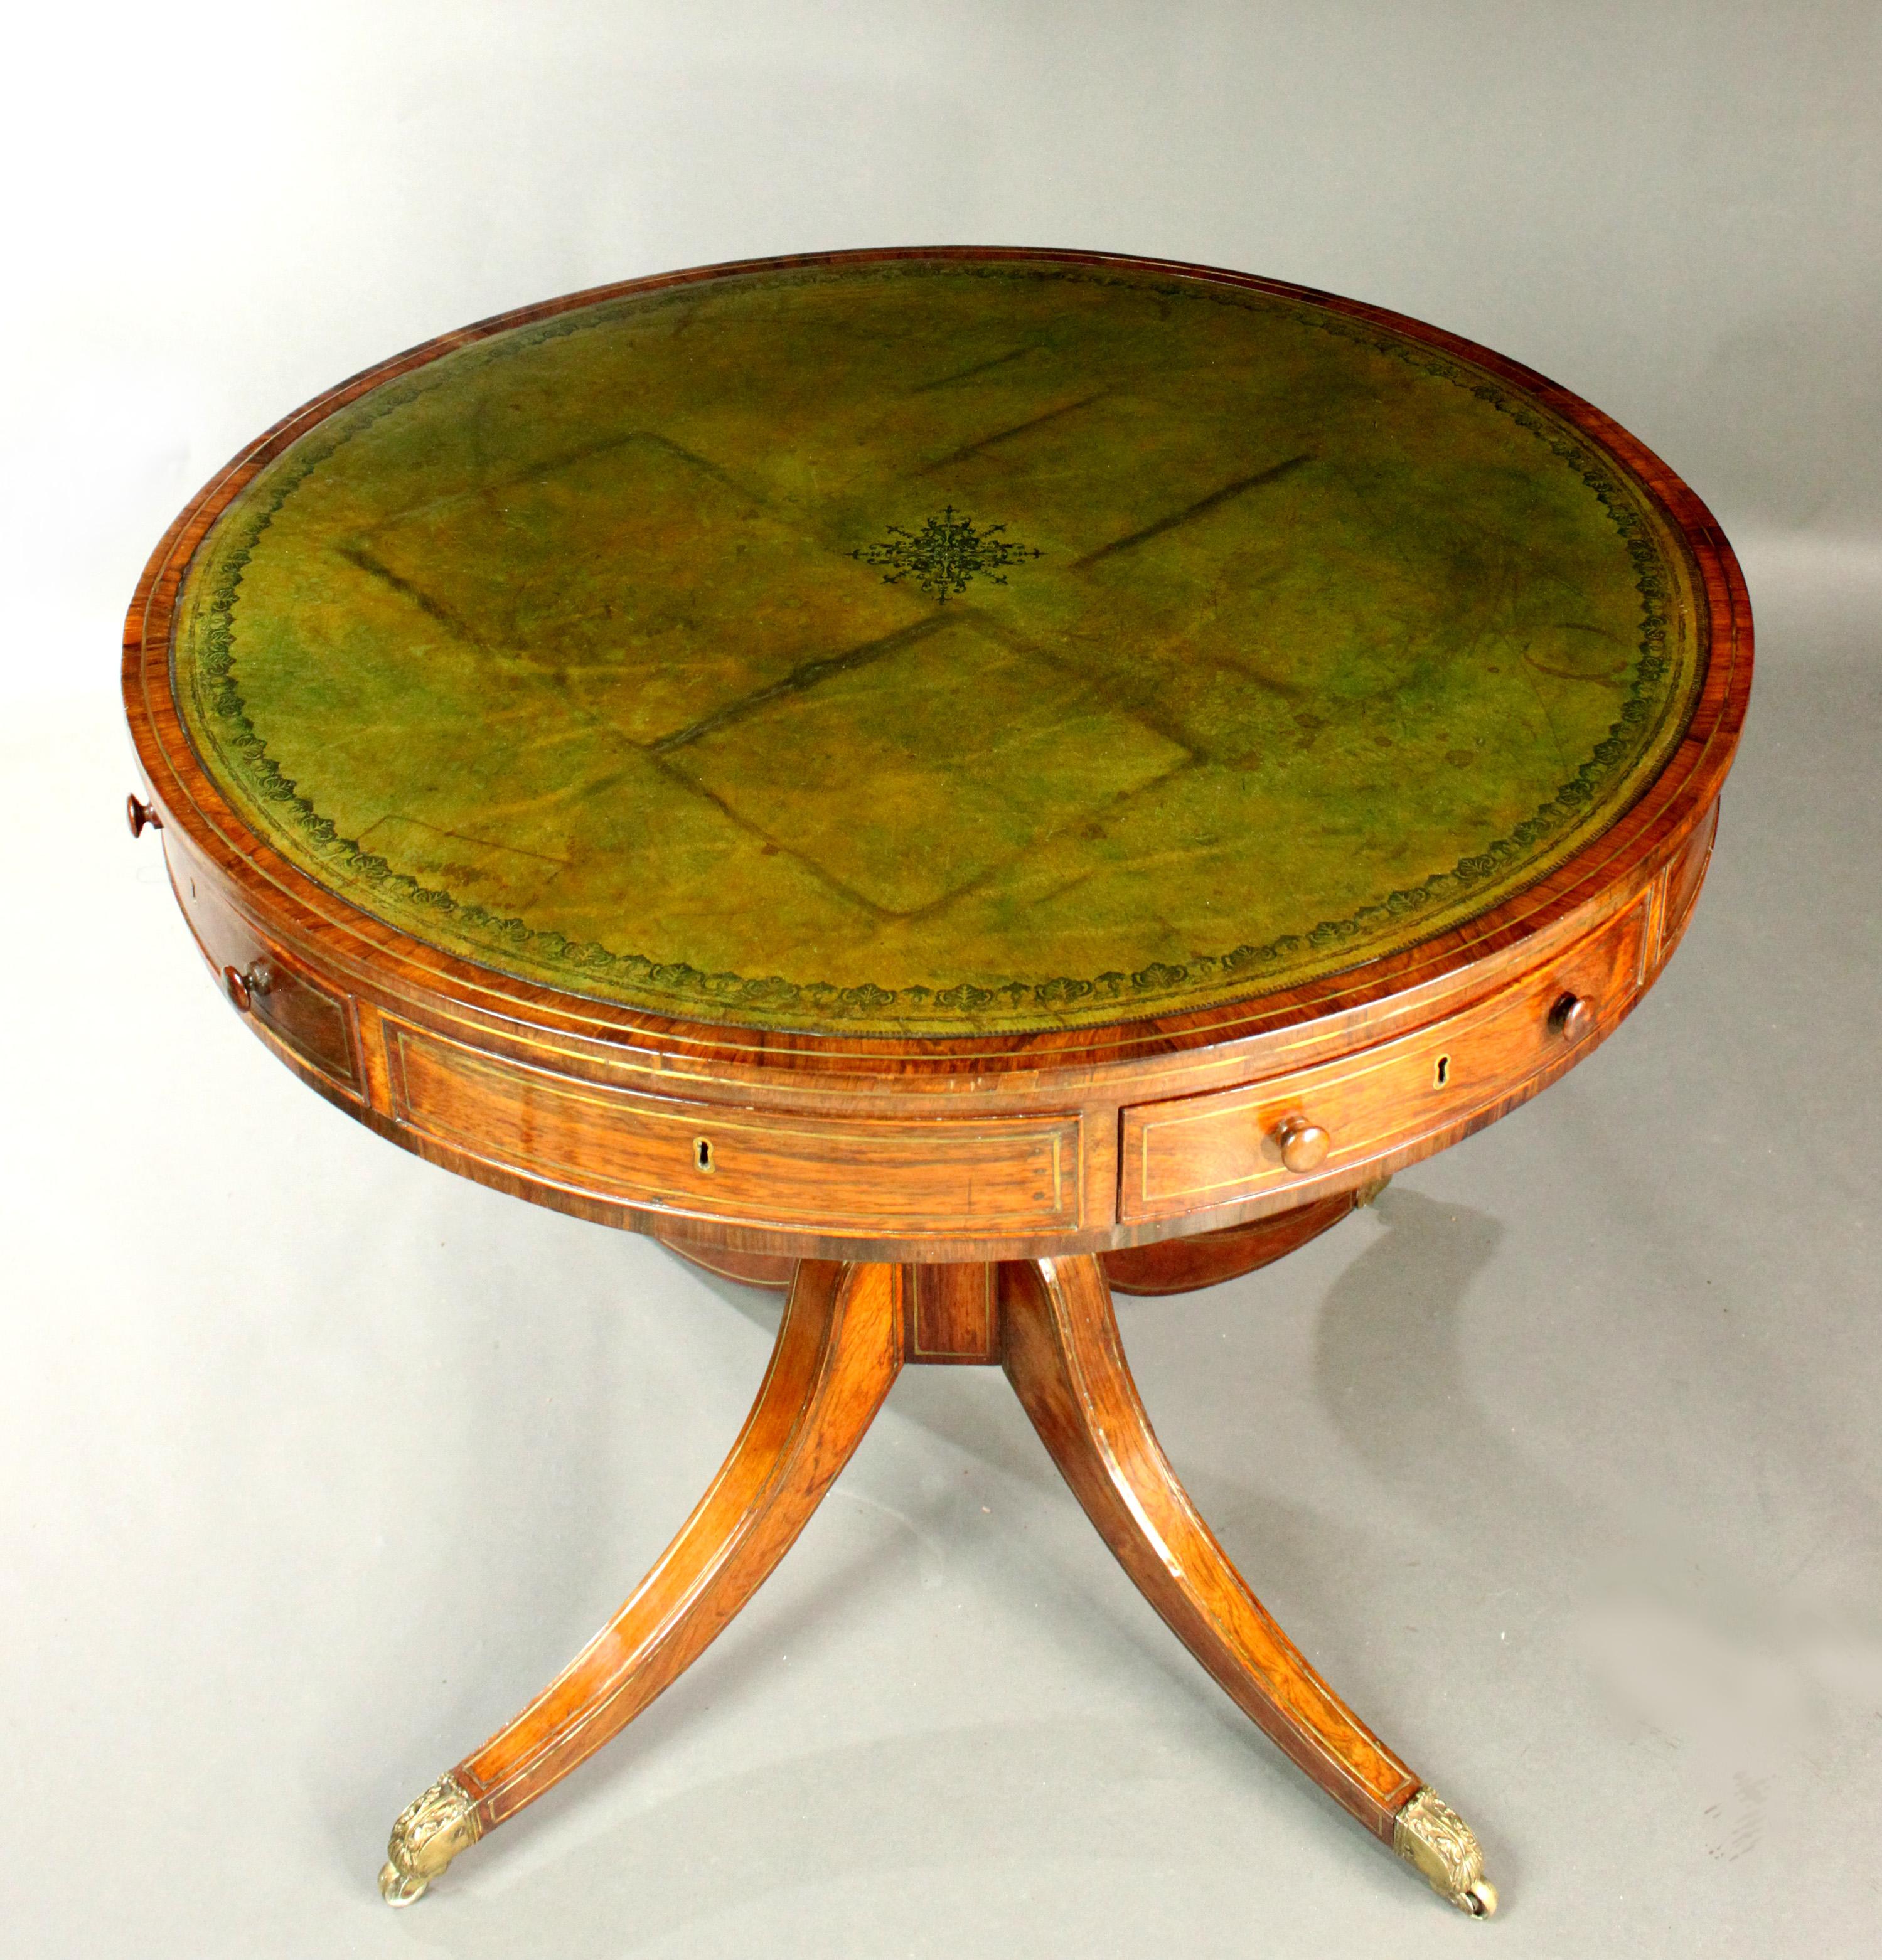 Regency Rosewood Drum Table In Good Condition For Sale In Bradford-on-Avon, Wiltshire